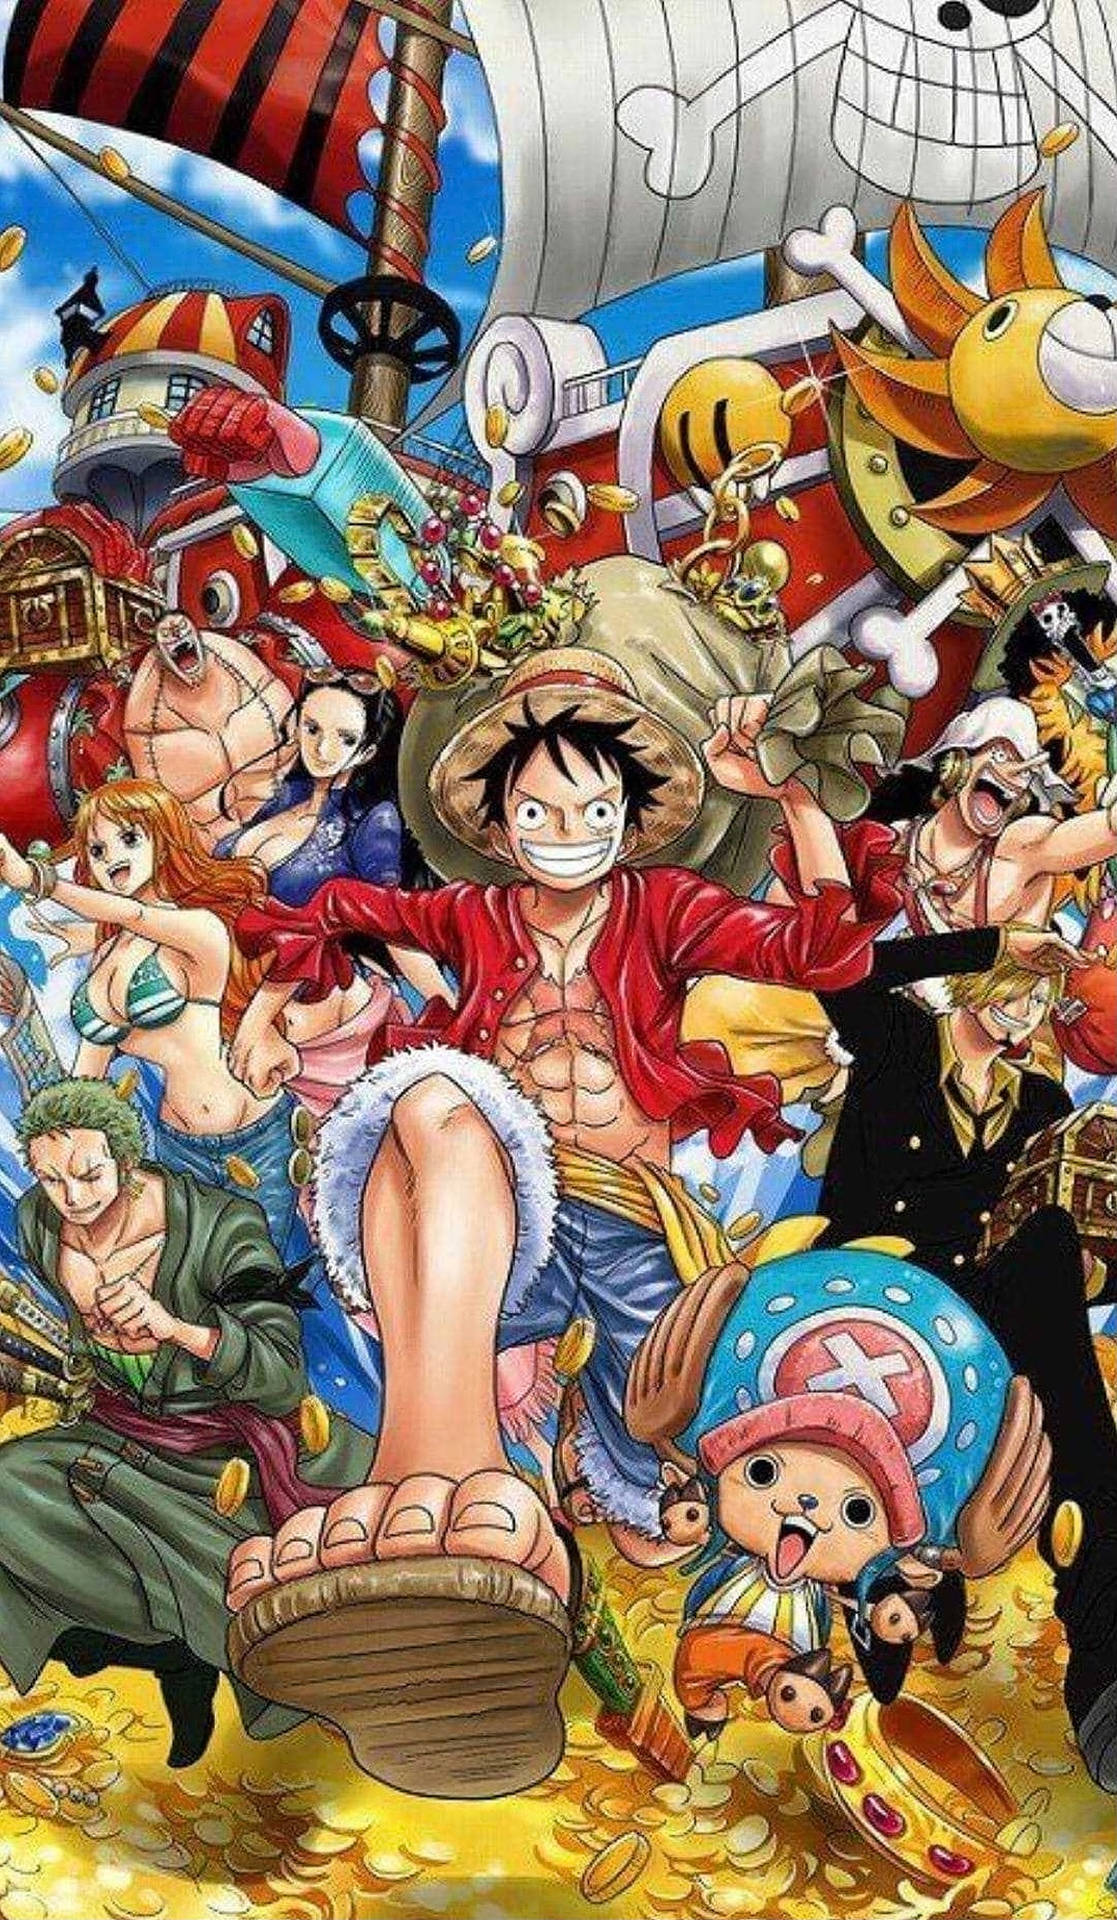 200+] One Piece Iphone Wallpapers for FREE 